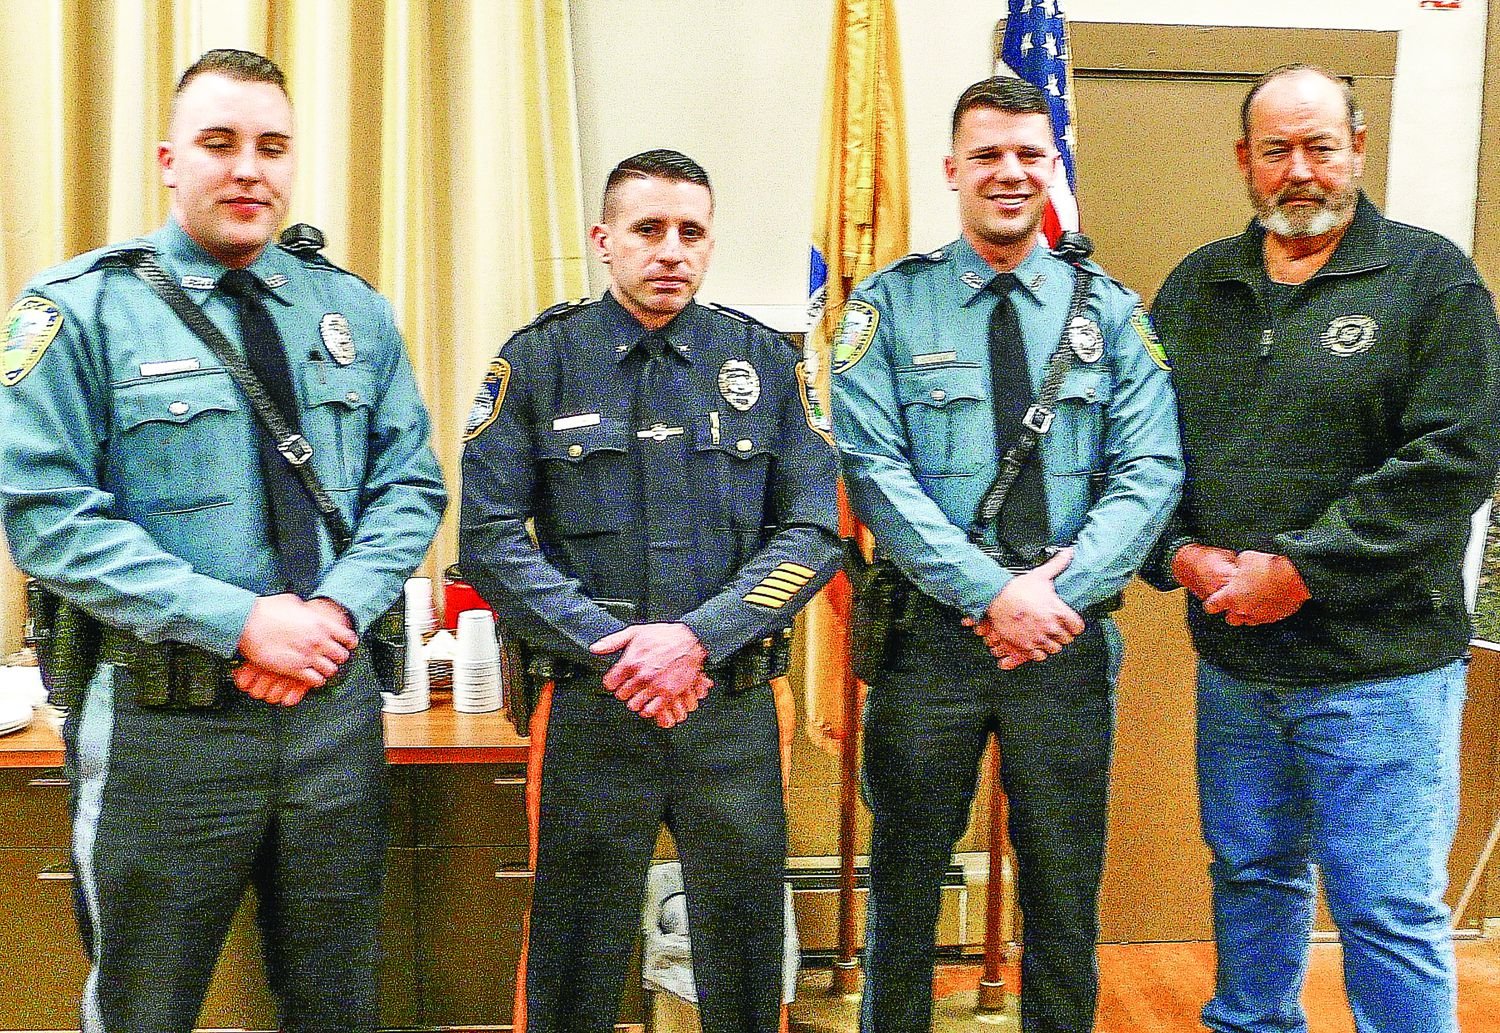 The Frenchtown Police Department has been filled out. The March 6 council meeting was attended by, from left, new-hire Erik Eccles; High Bridge Police Chief Brett Bartman, who is helping to train the new officers; another new-hire Michael Cristadoro; and Frenchtown Police Chief Al Kurylka, who is off-duty following knee surgery.